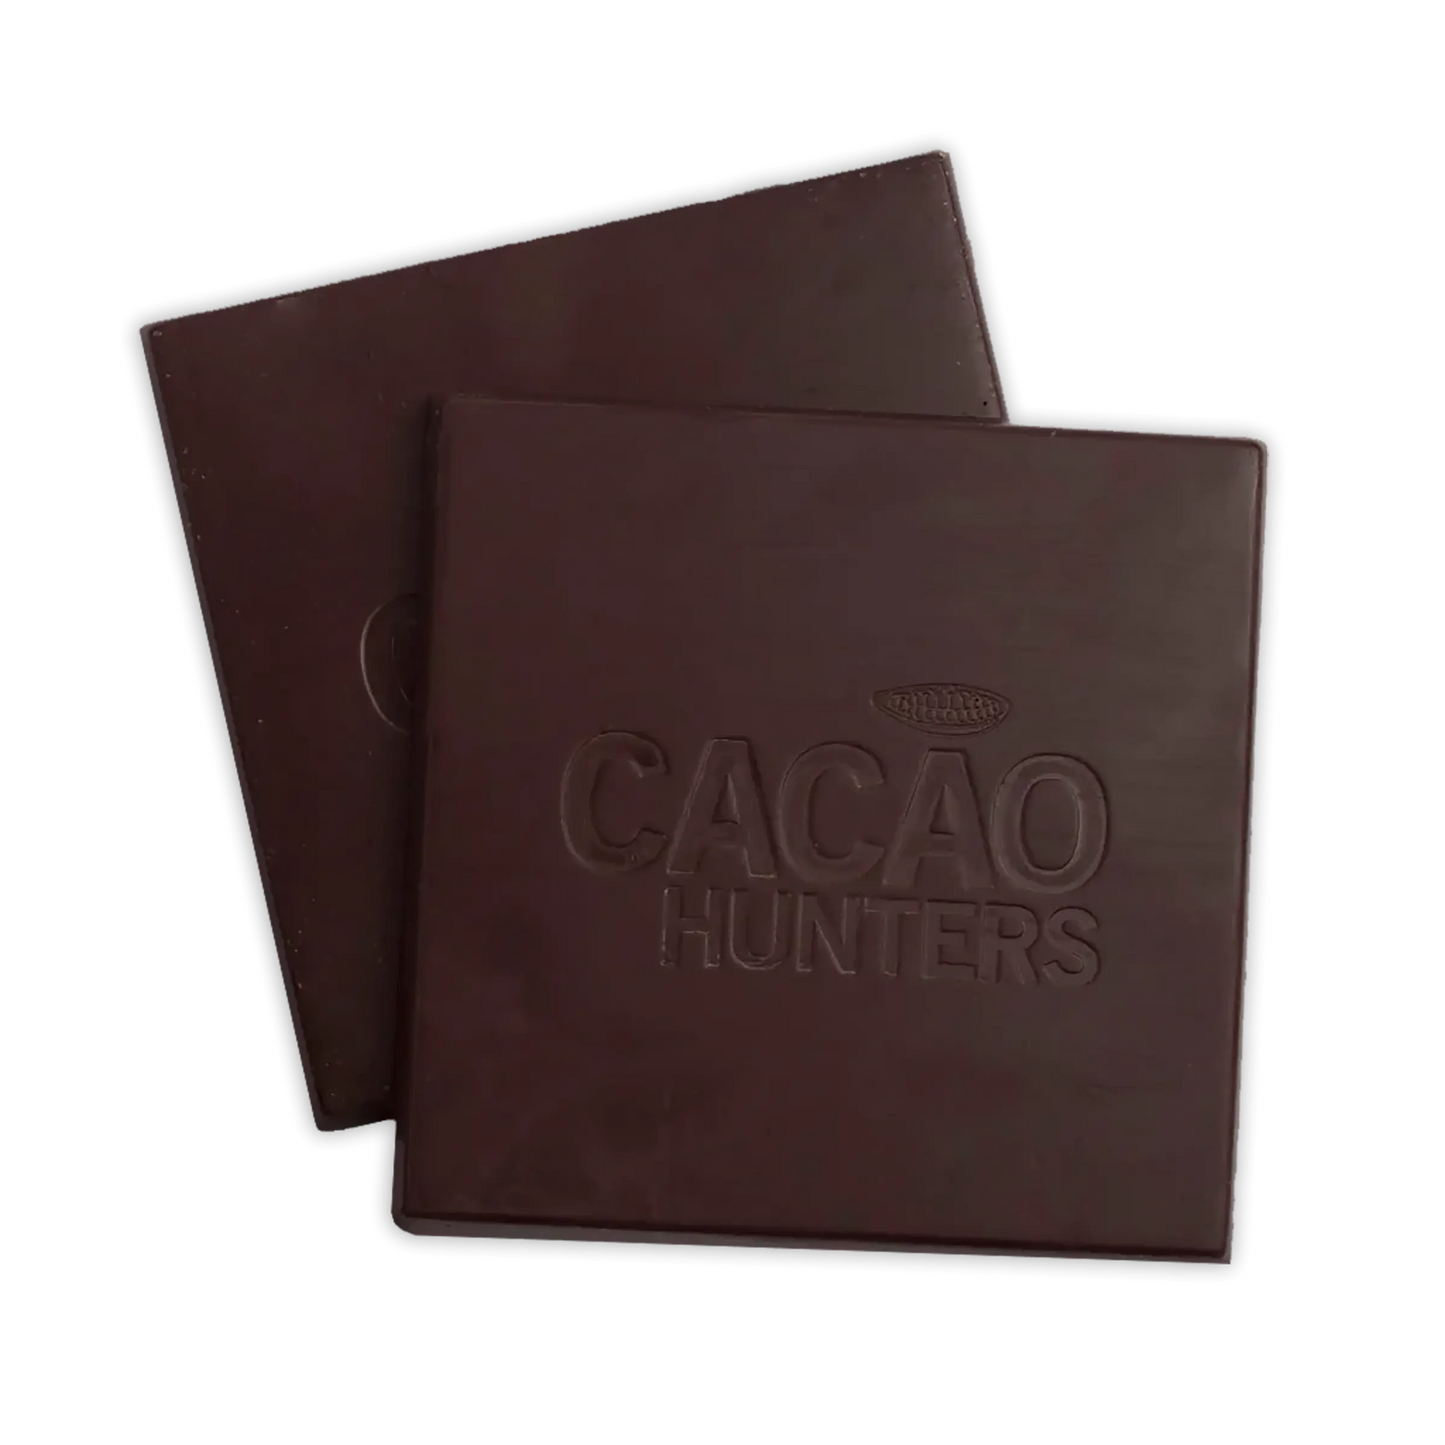 Cacao Hunters Colombia 100%